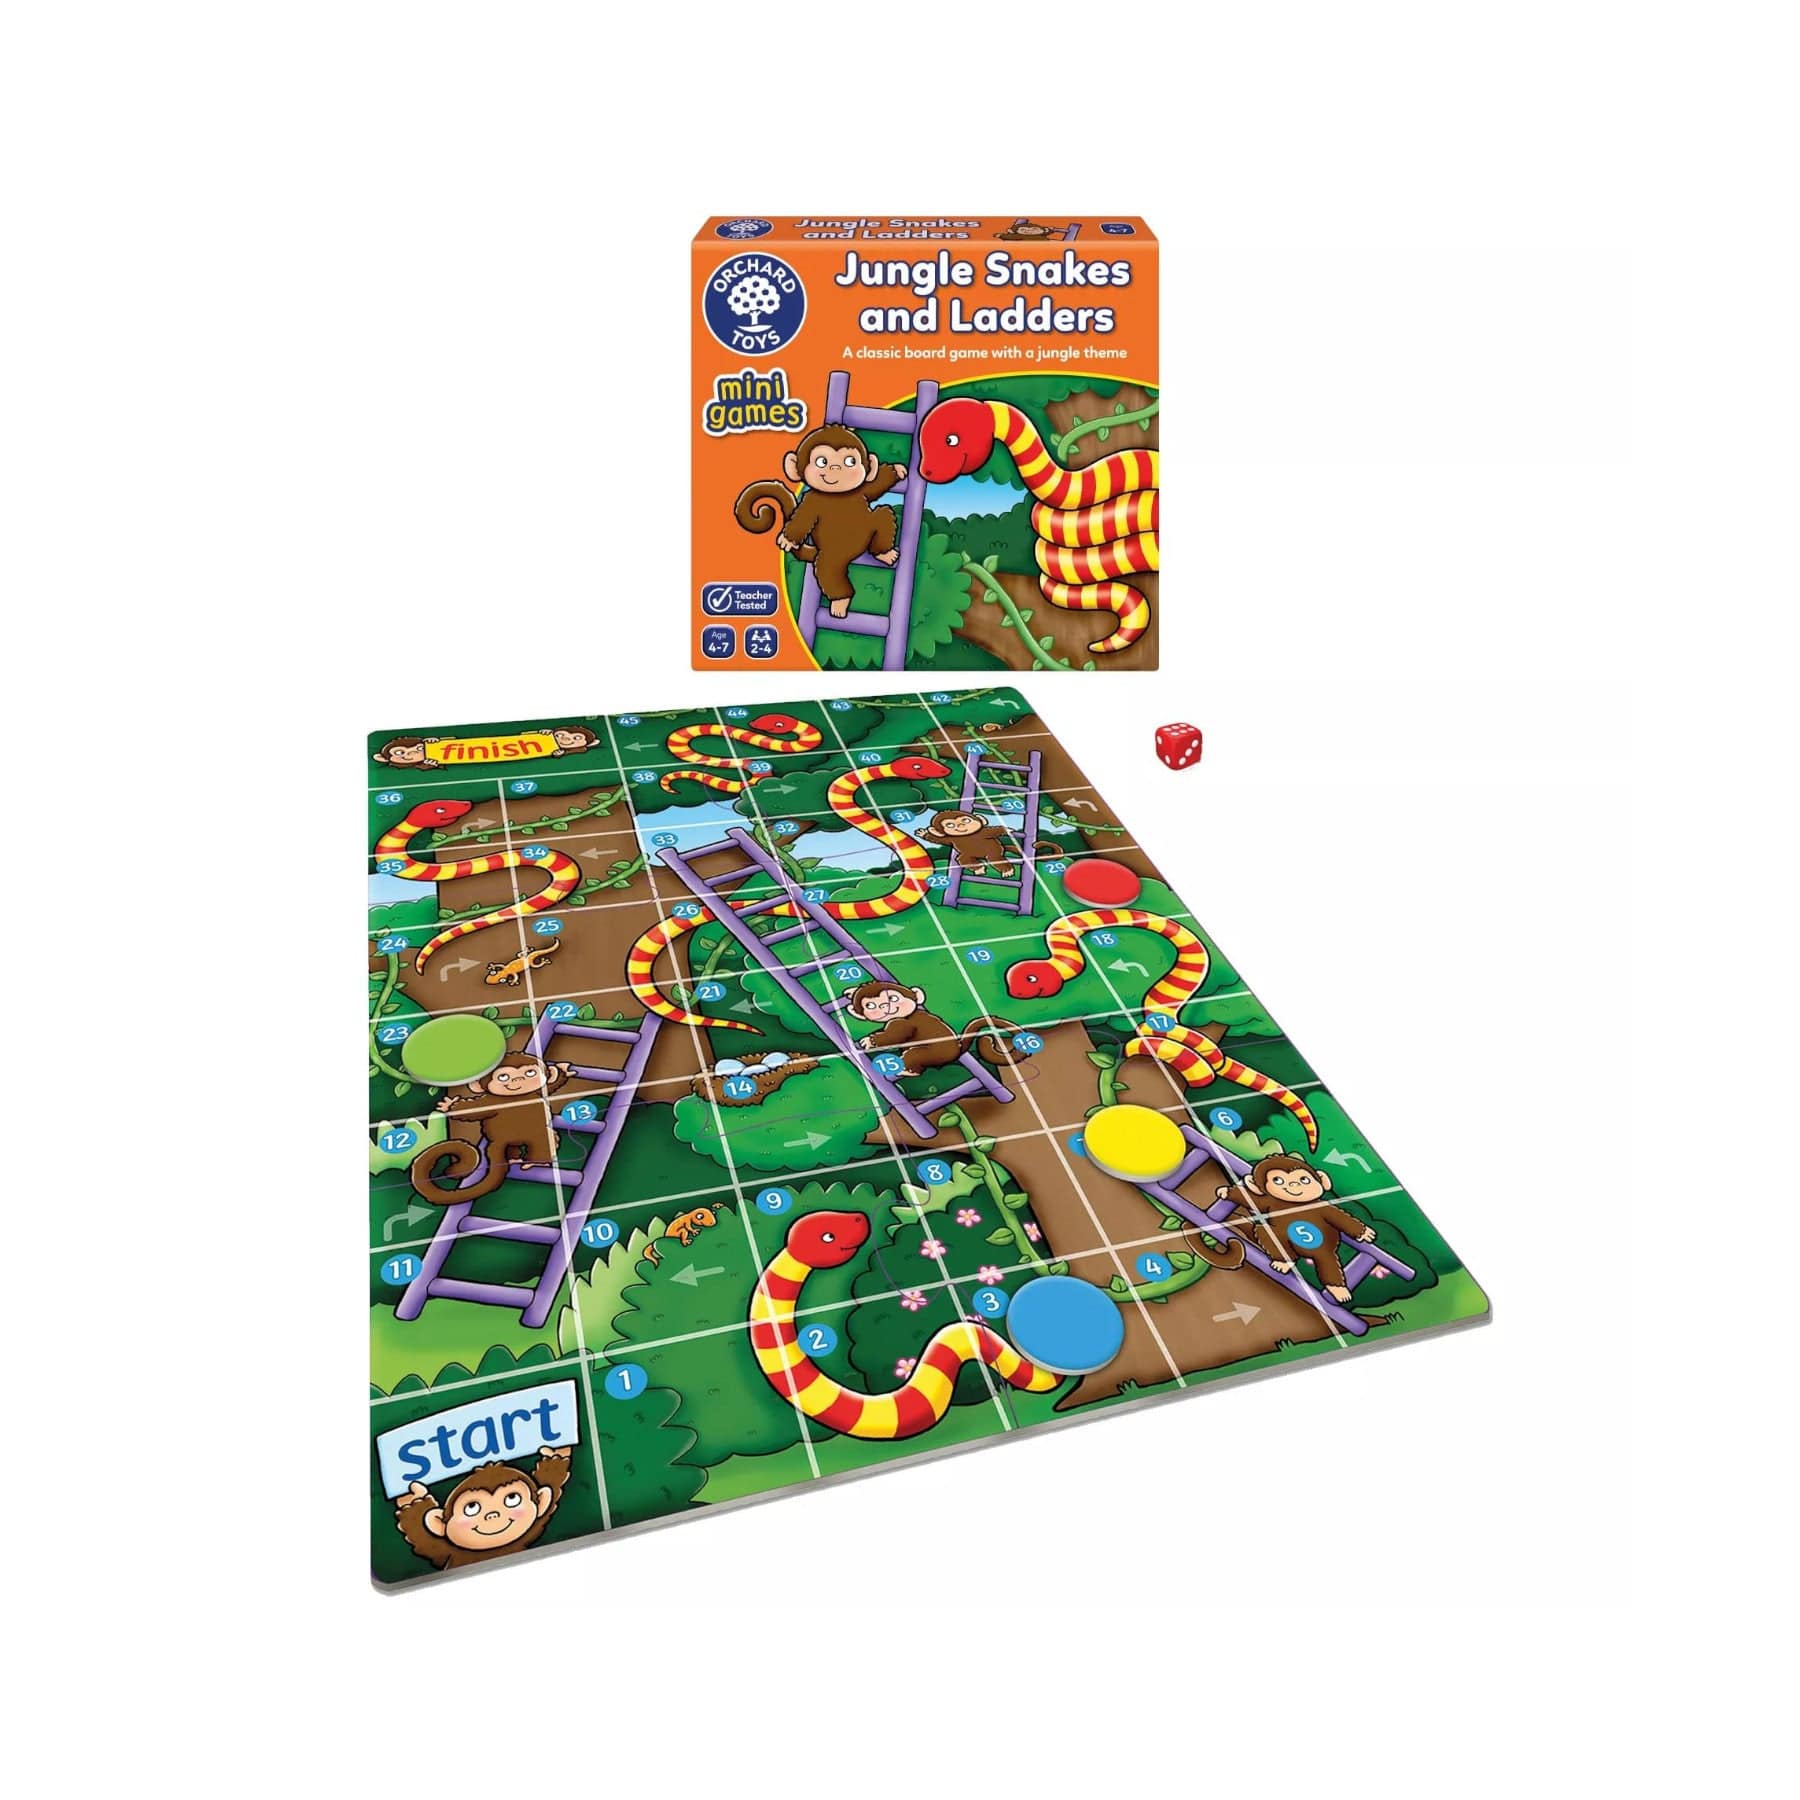 Jungle Snakes and Ladders Board Game Set Up on Table with Die and Game Box, Children's Classic Board Game with Jungle Theme, Colorful Illustration on Game Board with Snakes, Ladders, and Cartoon Monkeys.